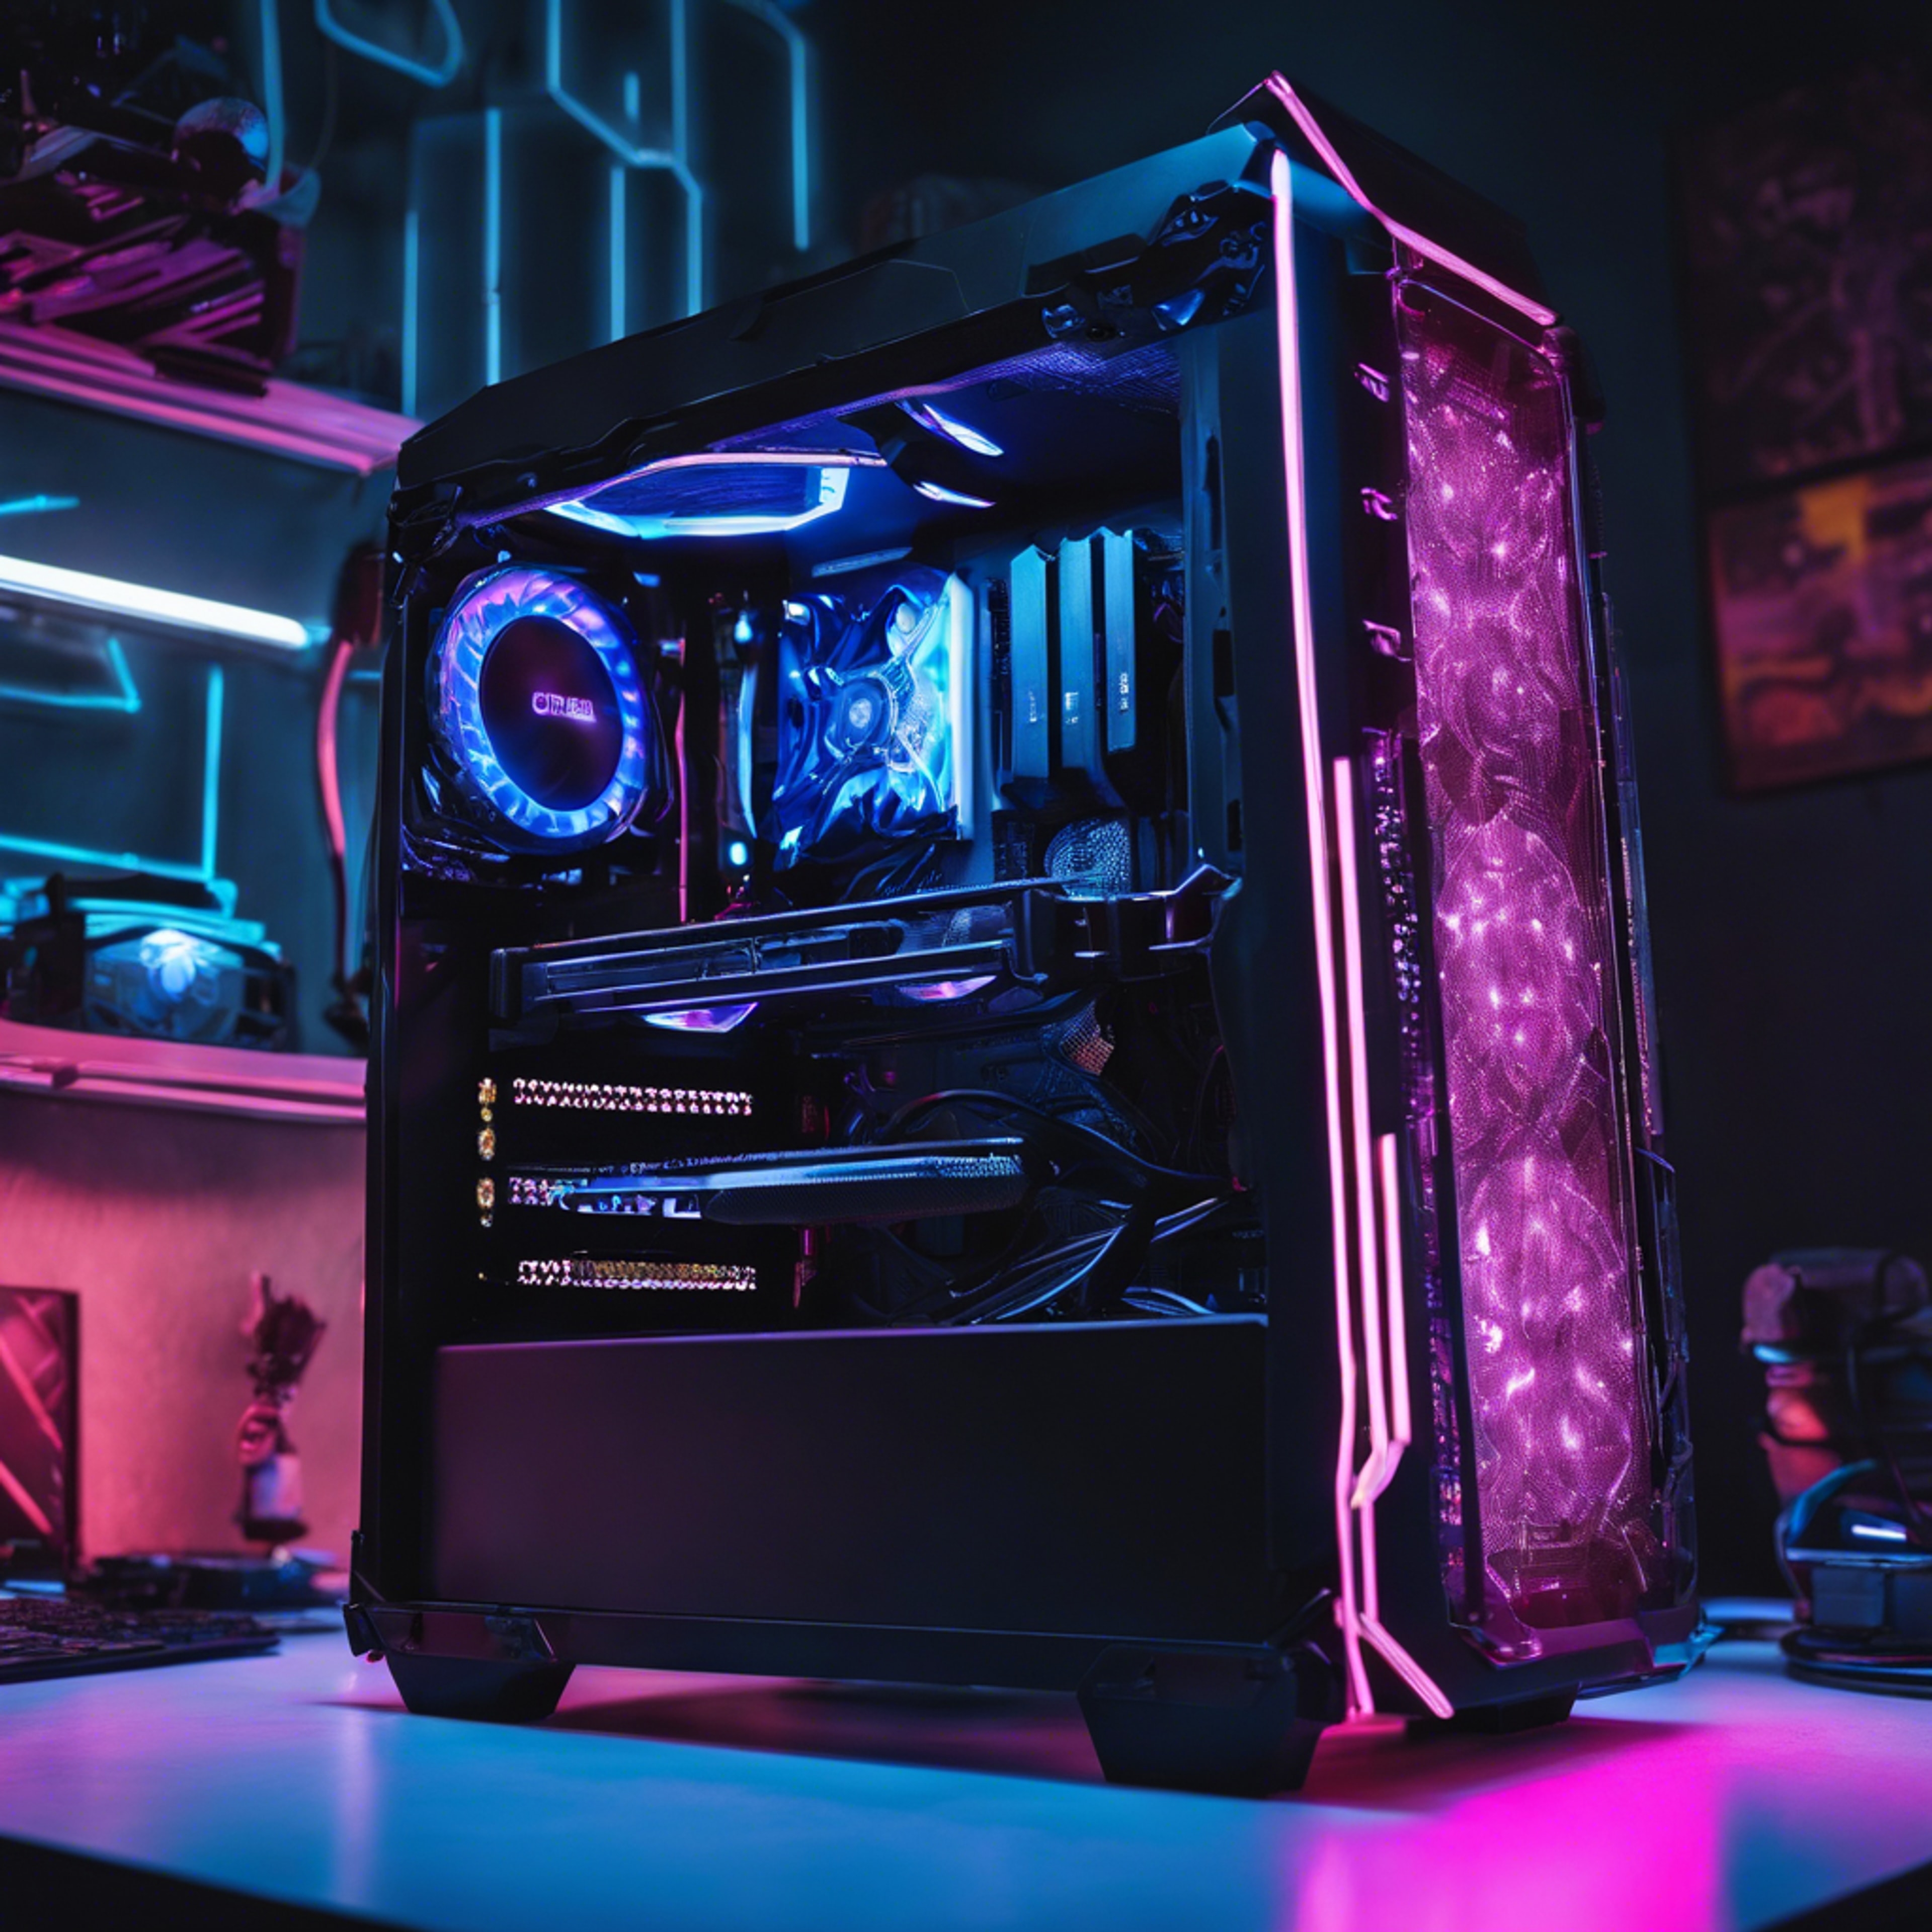 A cyberpunk-style black gaming PC with neon blue LED lights. Wallpaper[4f1d7ee7161d4e2894f4]